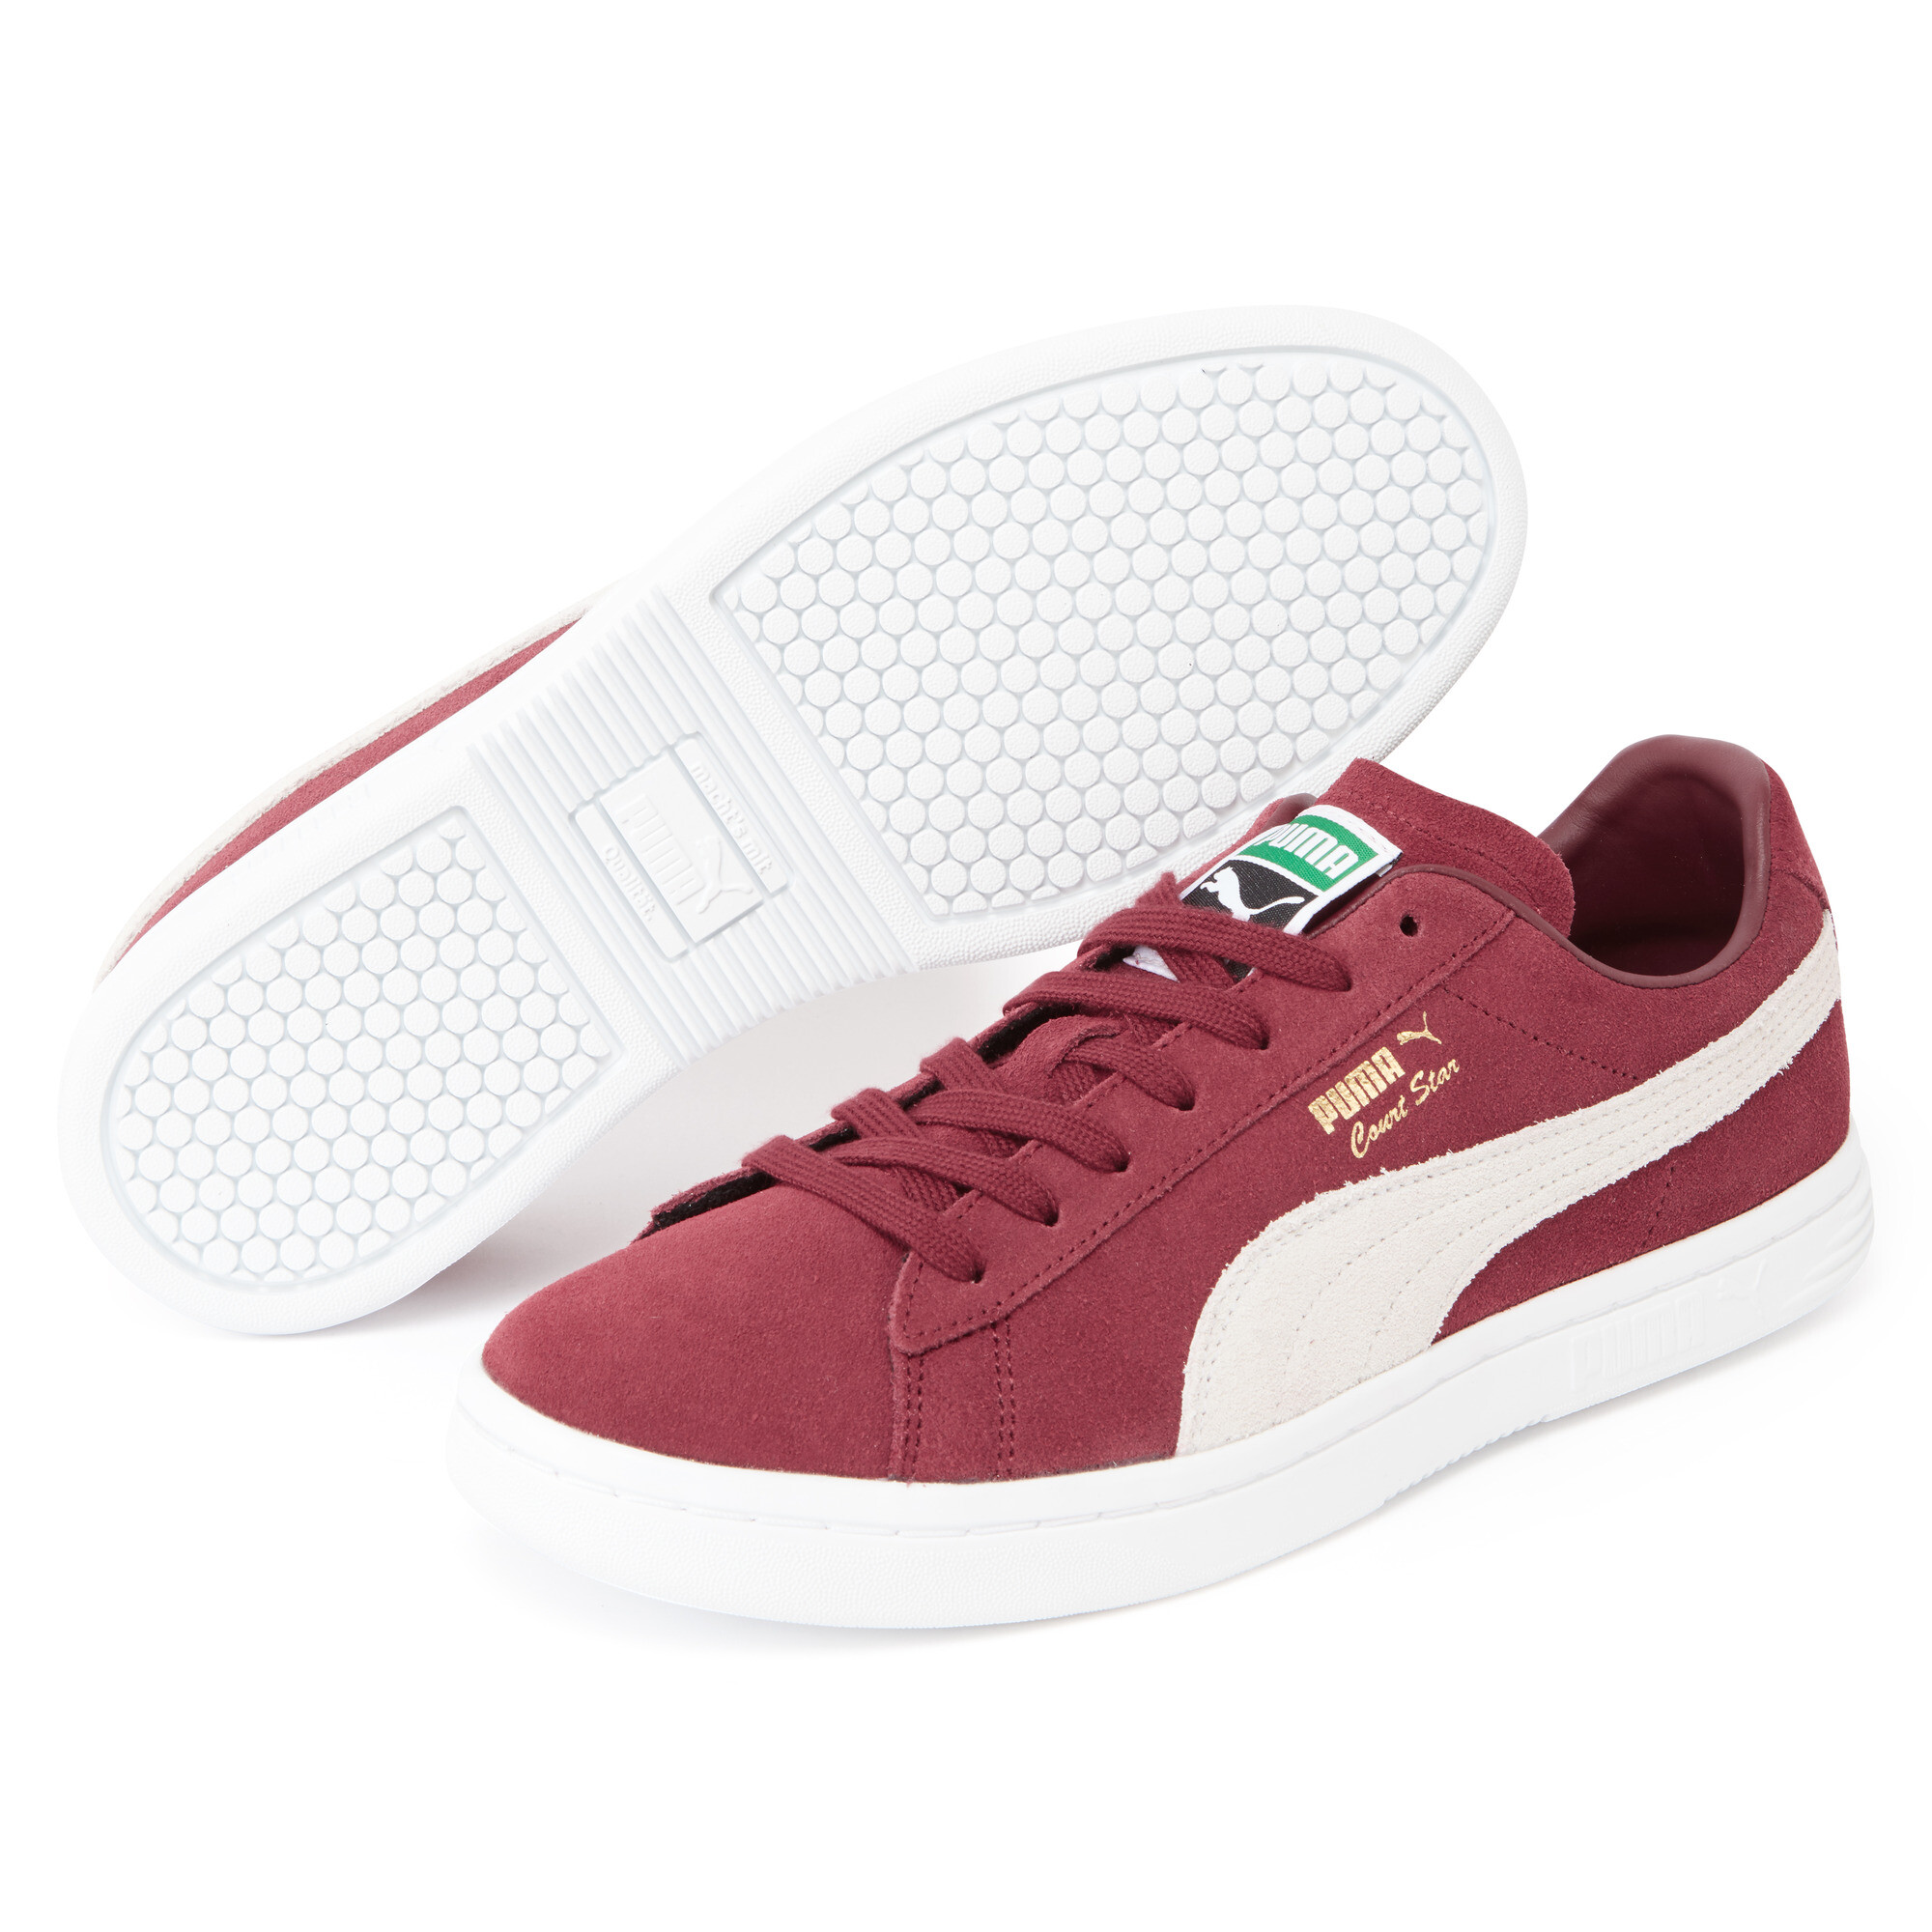 PUMA Court Star Suede Low Trainers Sports Shoes | eBay